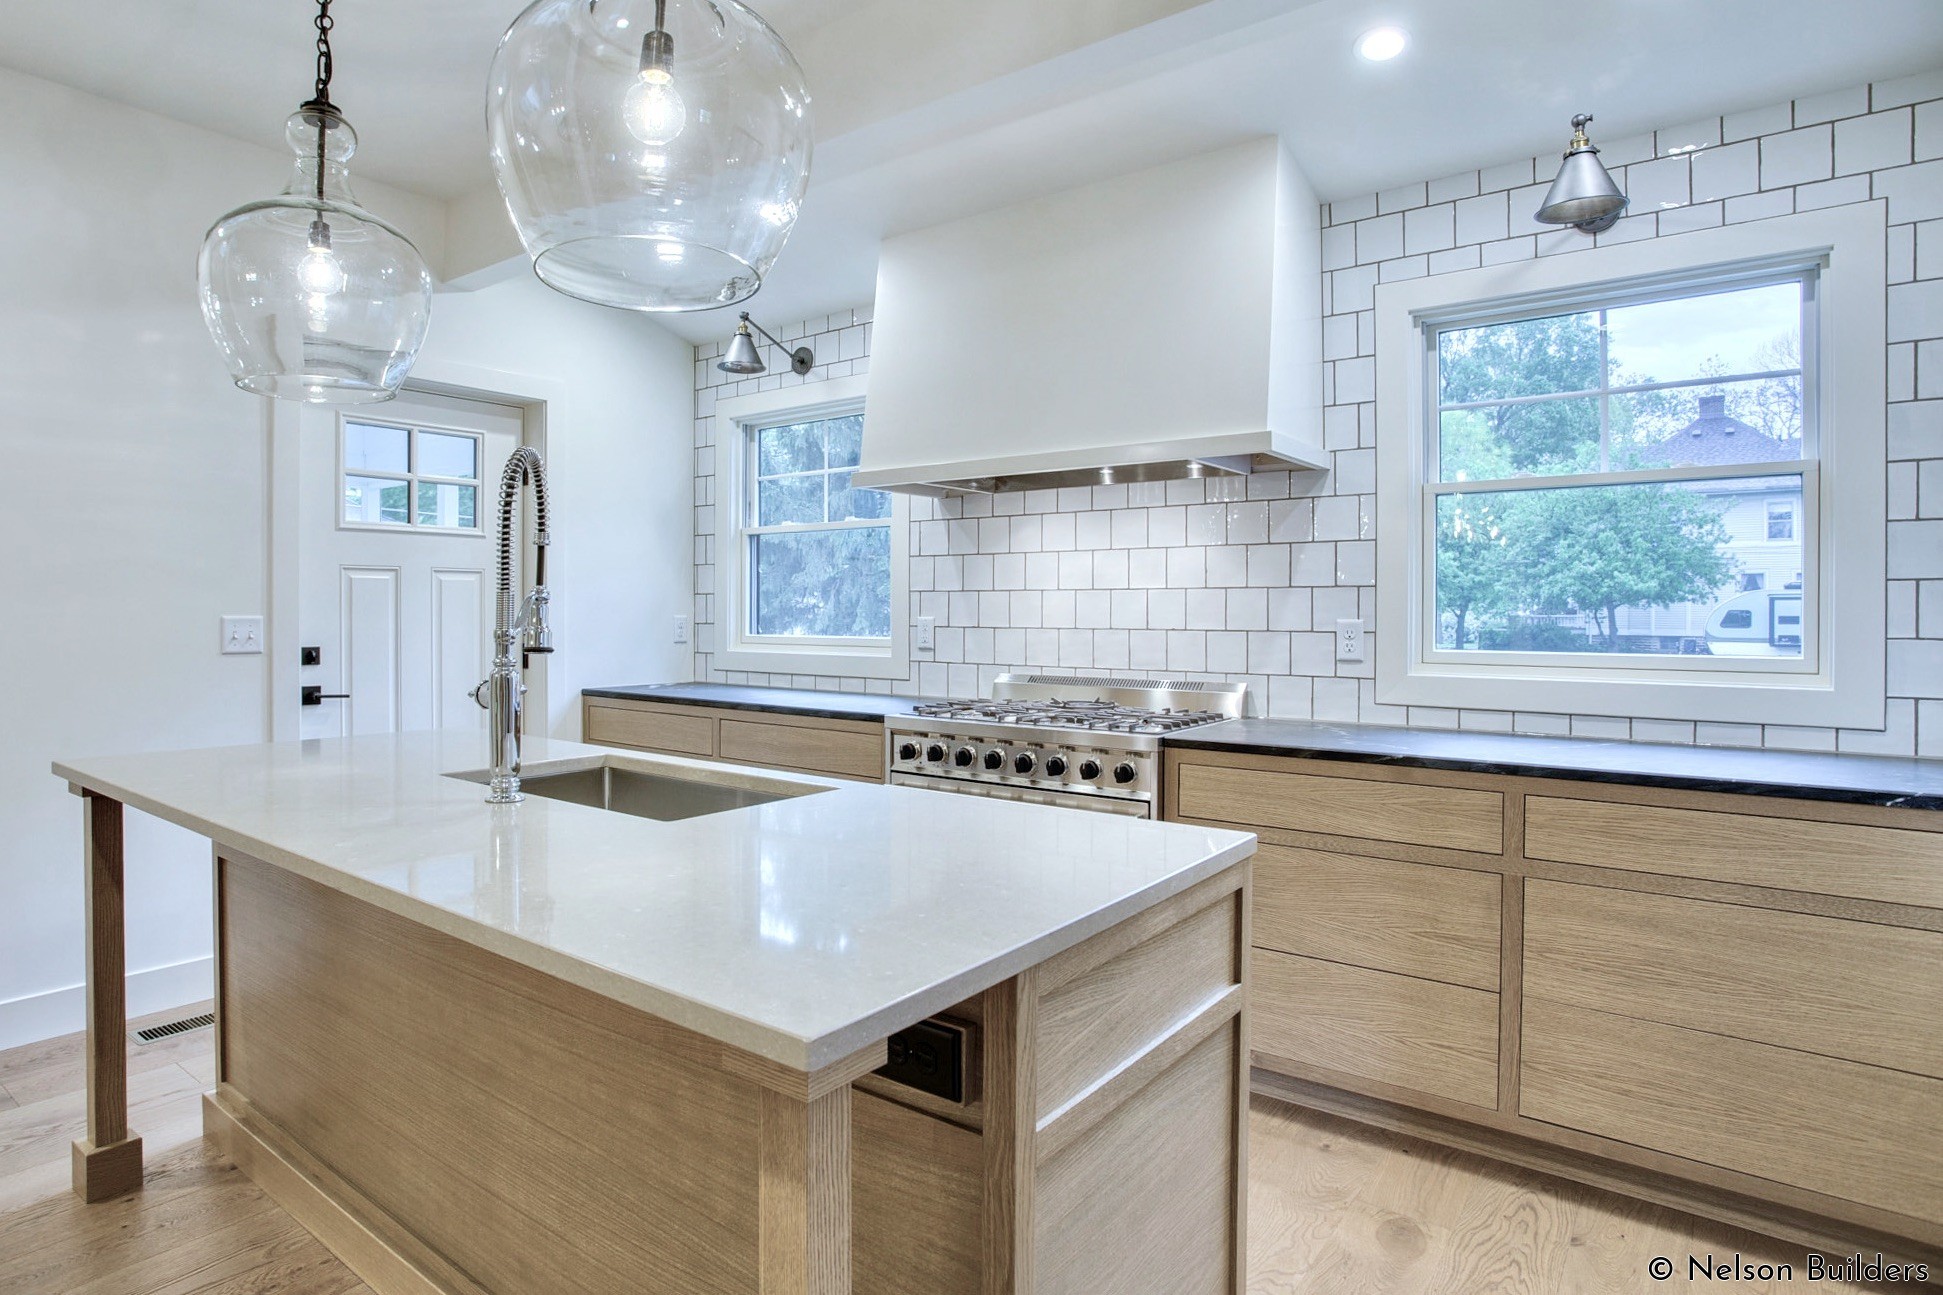 The white oak cabinets and built-in hood were custom made by the client's father, a personal touch for a family home.